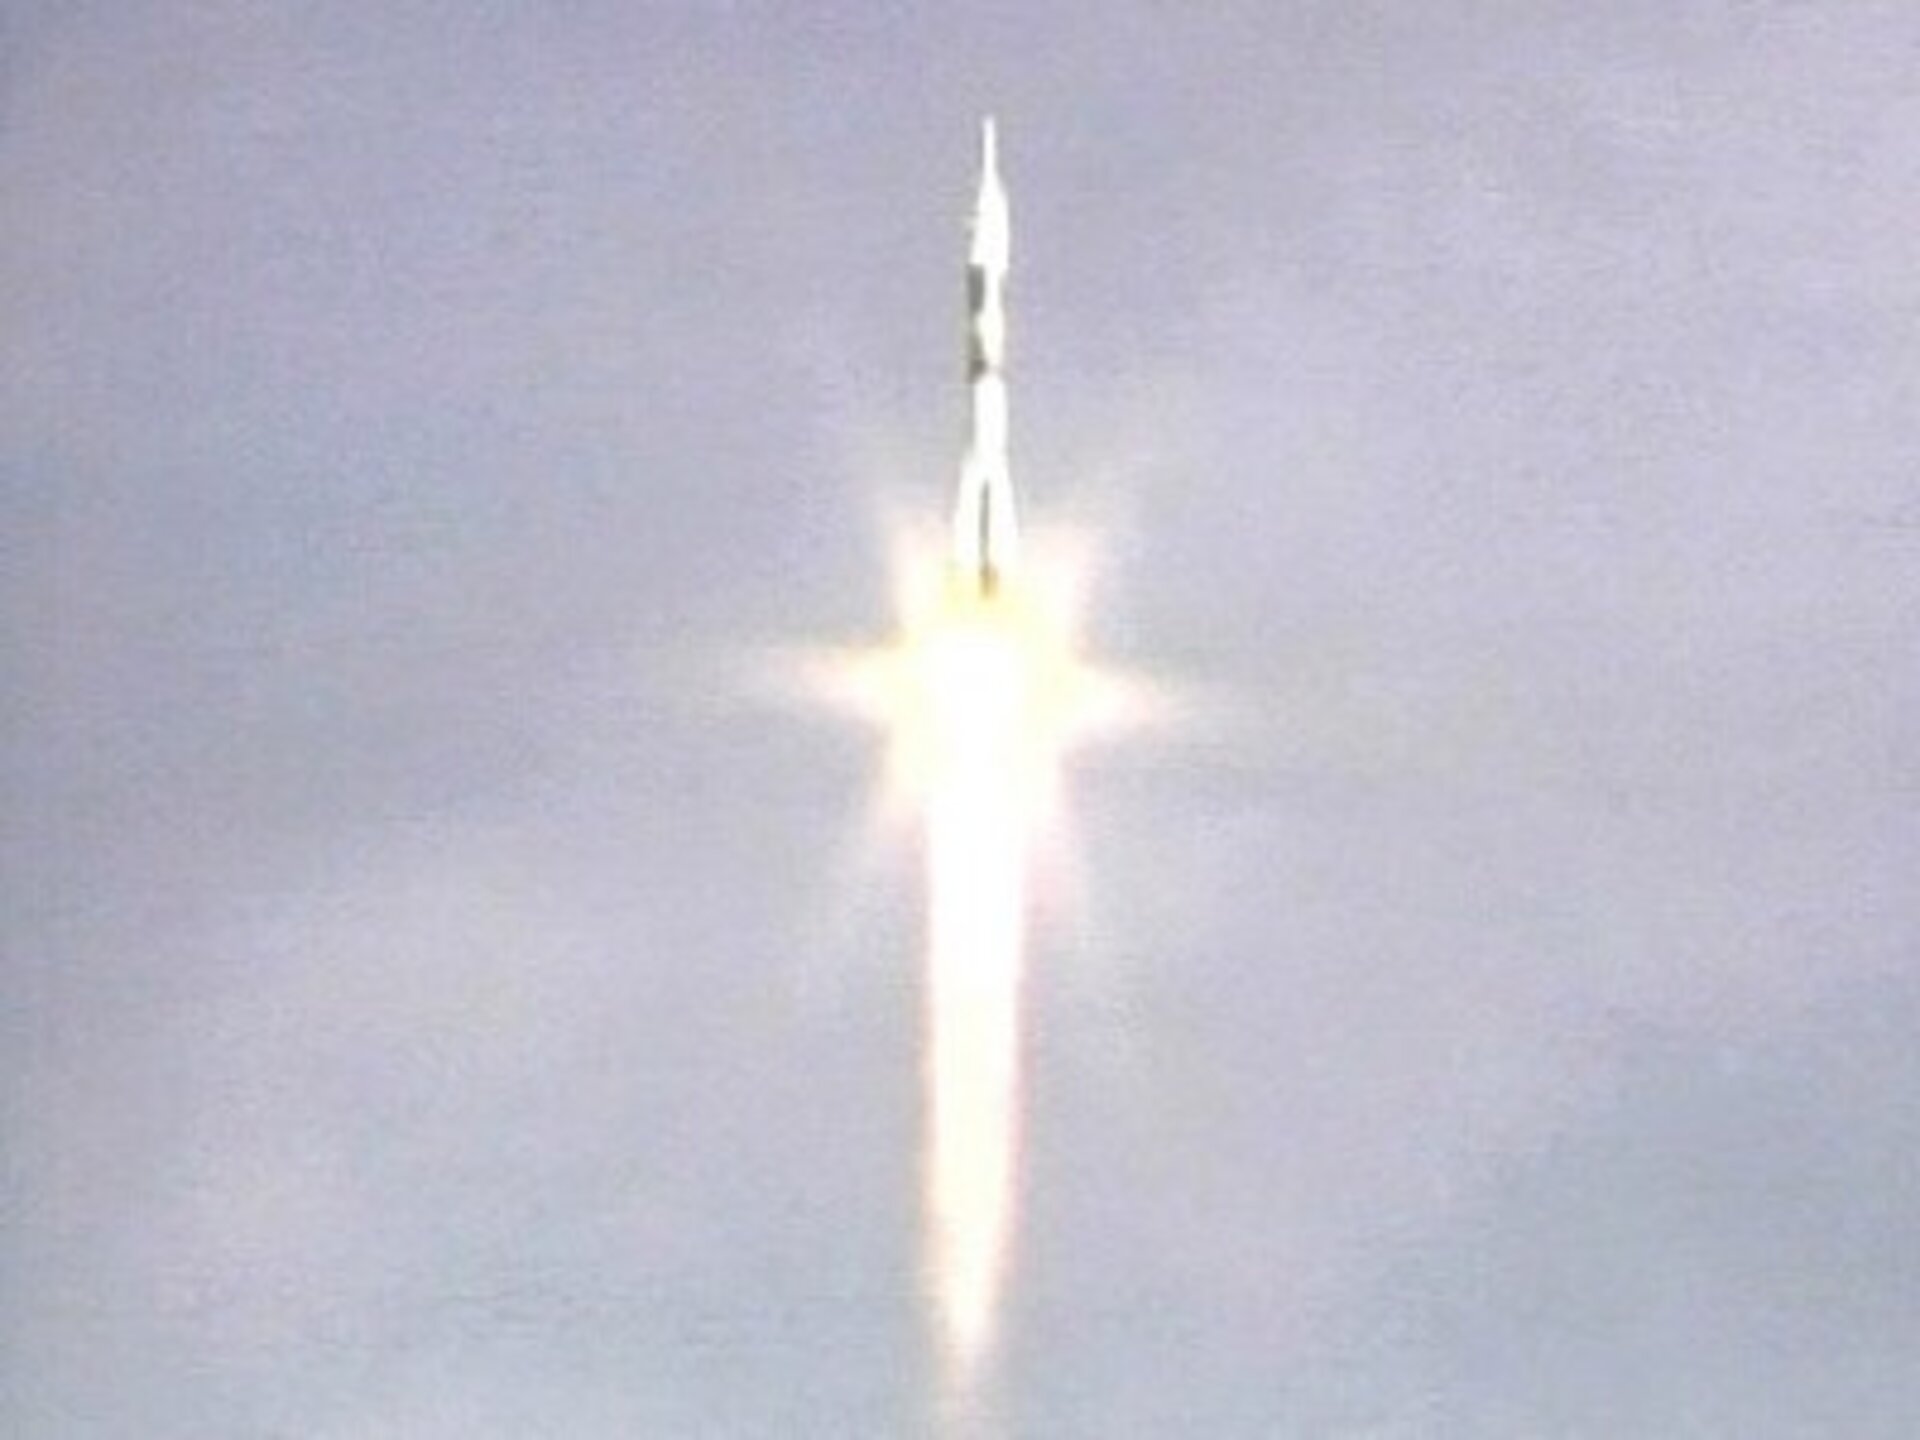 Lift-off of the Cervantes Mission from Baikonur at 07:38 CEST